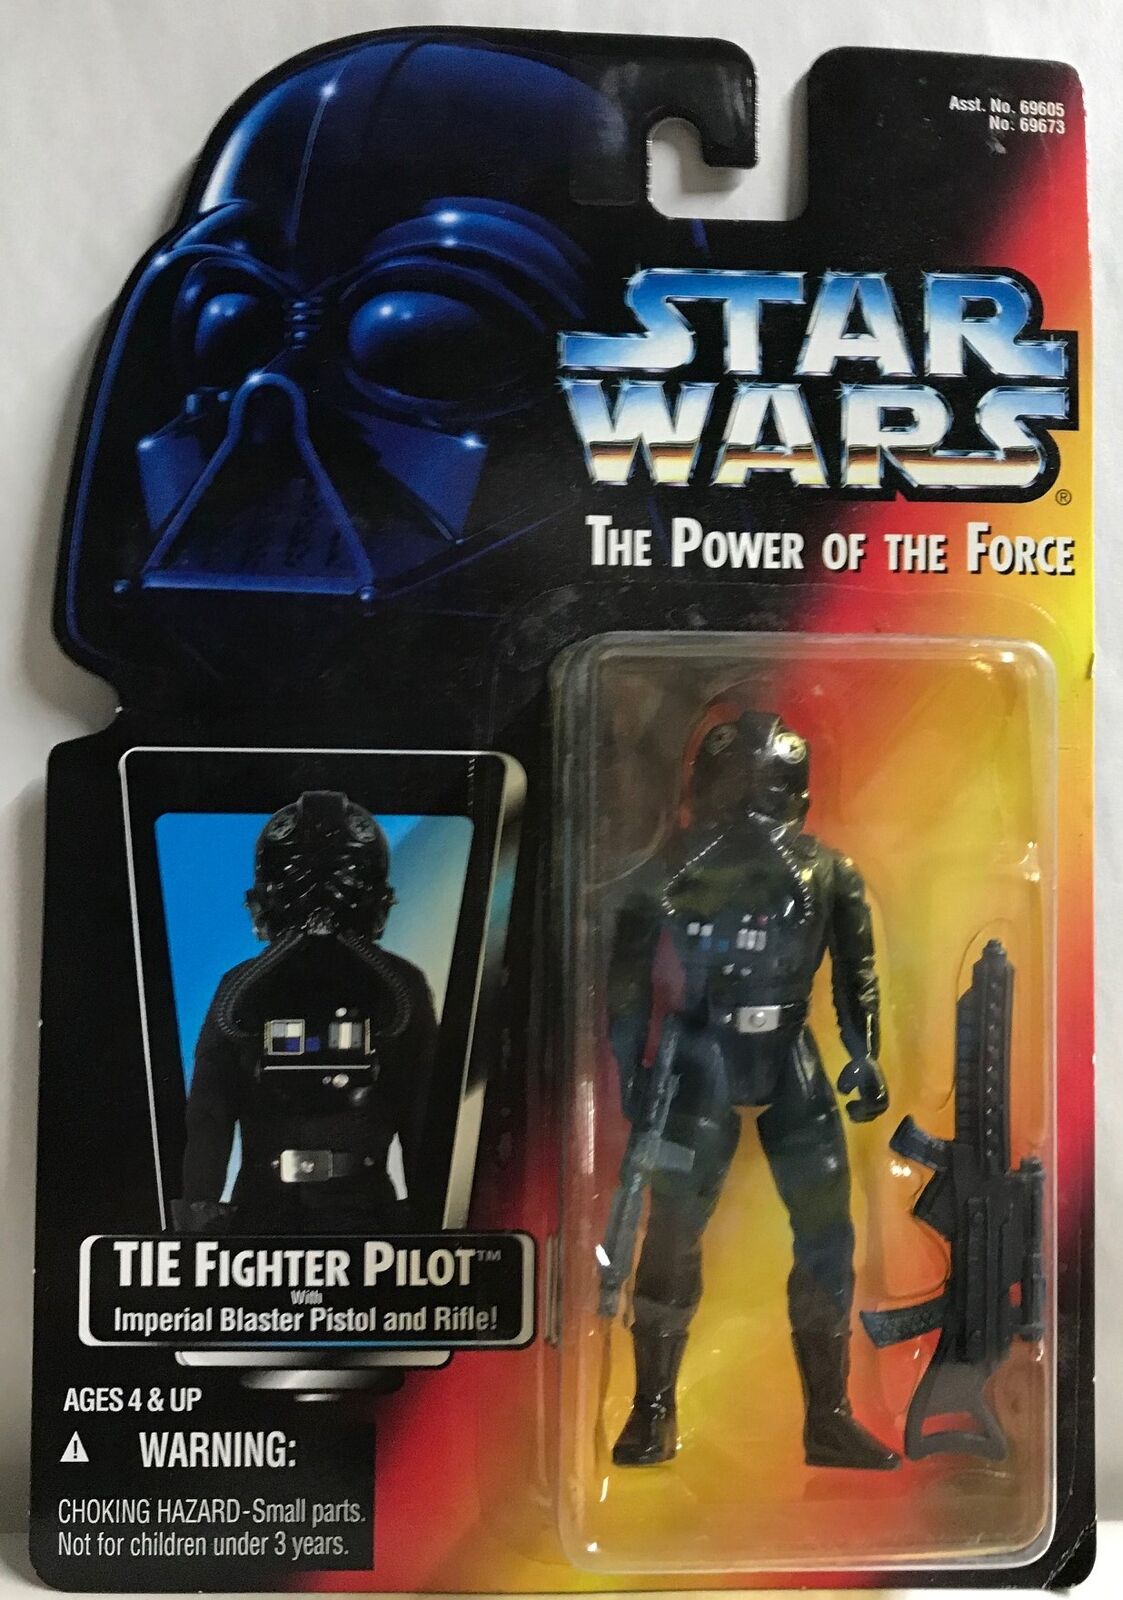 STAR WARS - KENNER - POTF - TIE FIGHTER PILOT - with Imperial Blaster Pistol and Rifle